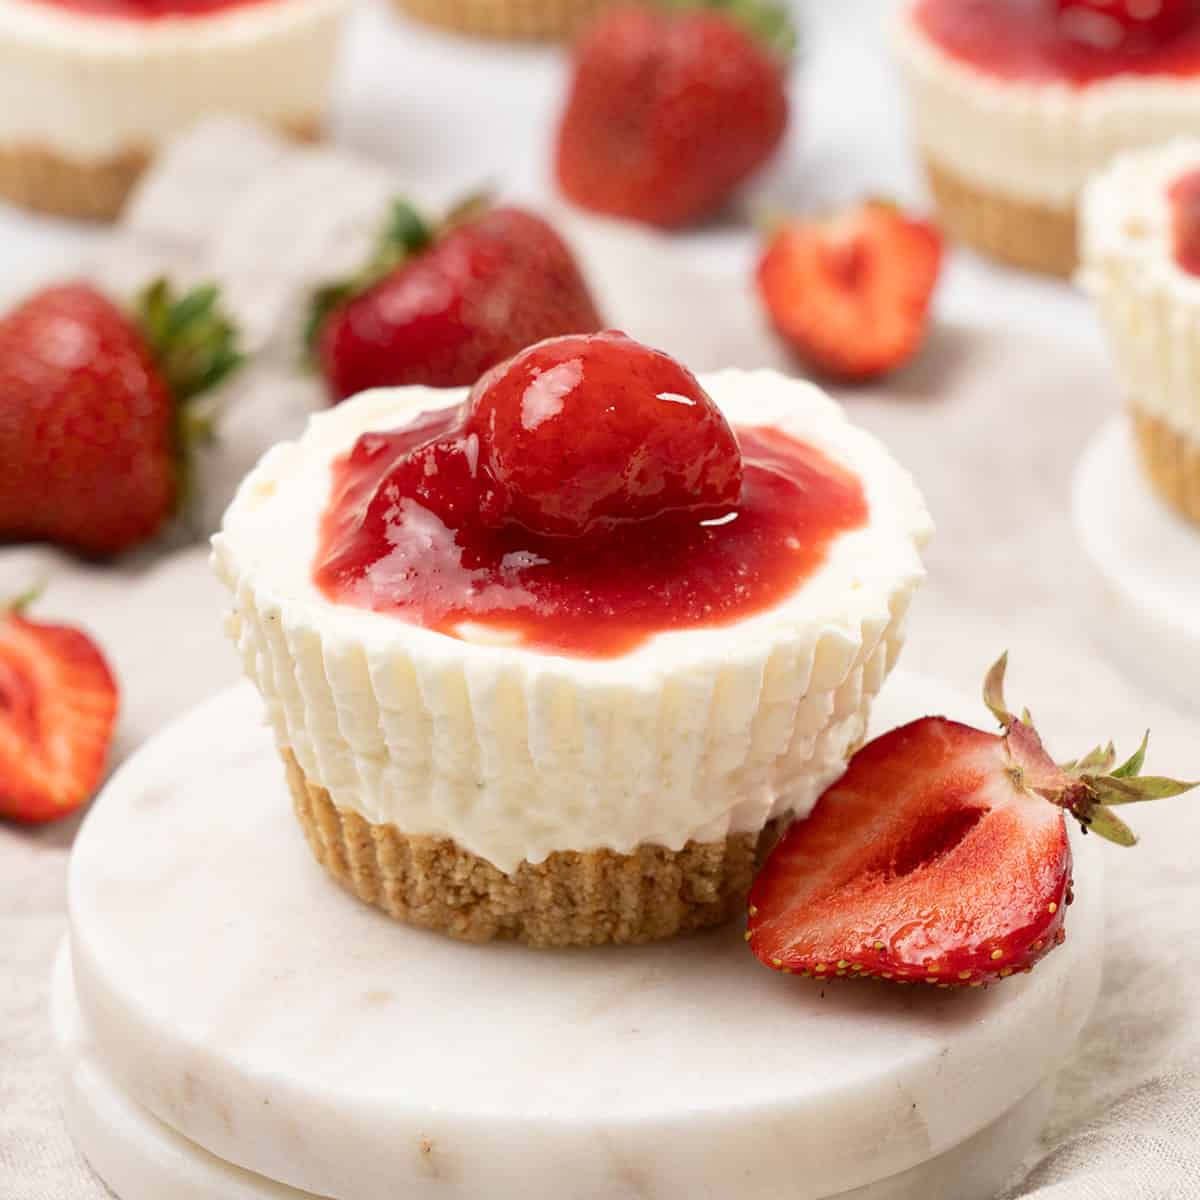 <p>If you are looking for the perfect fruity dessert to impress guests at your next birthday party, celebration, or gathering, these<a href="https://www.spatuladesserts.com/no-bake-cheesecake-bites/"> <strong>no-bake cheesecake bites</strong></a> are just what you are looking for. Made with a crunchy graham cracker crust, creamy cheesecake filling, and fresh strawberry topping, they are a fun, bite-sized treat that all ages will love!</p><p><strong>Go to the recipe: <a href="https://www.spatuladesserts.com/no-bake-cheesecake-bites/">No Bake Cheesecake Bites</a></strong></p>